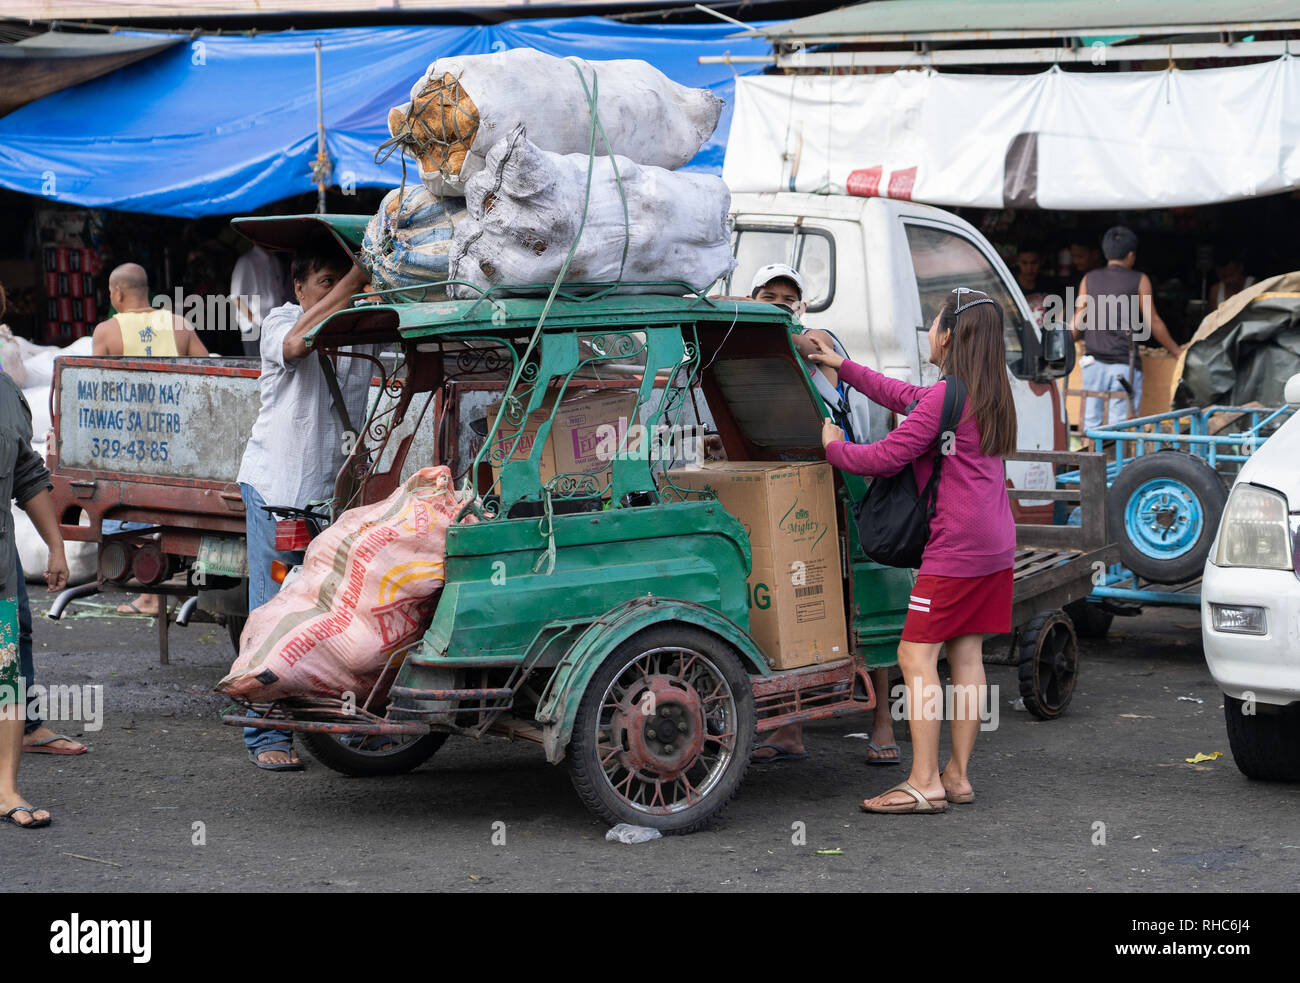 A vehicle known as a tricycle in the Philippines,a combination of motorcycle and sidecar, being loaded with market produce Stock Photo